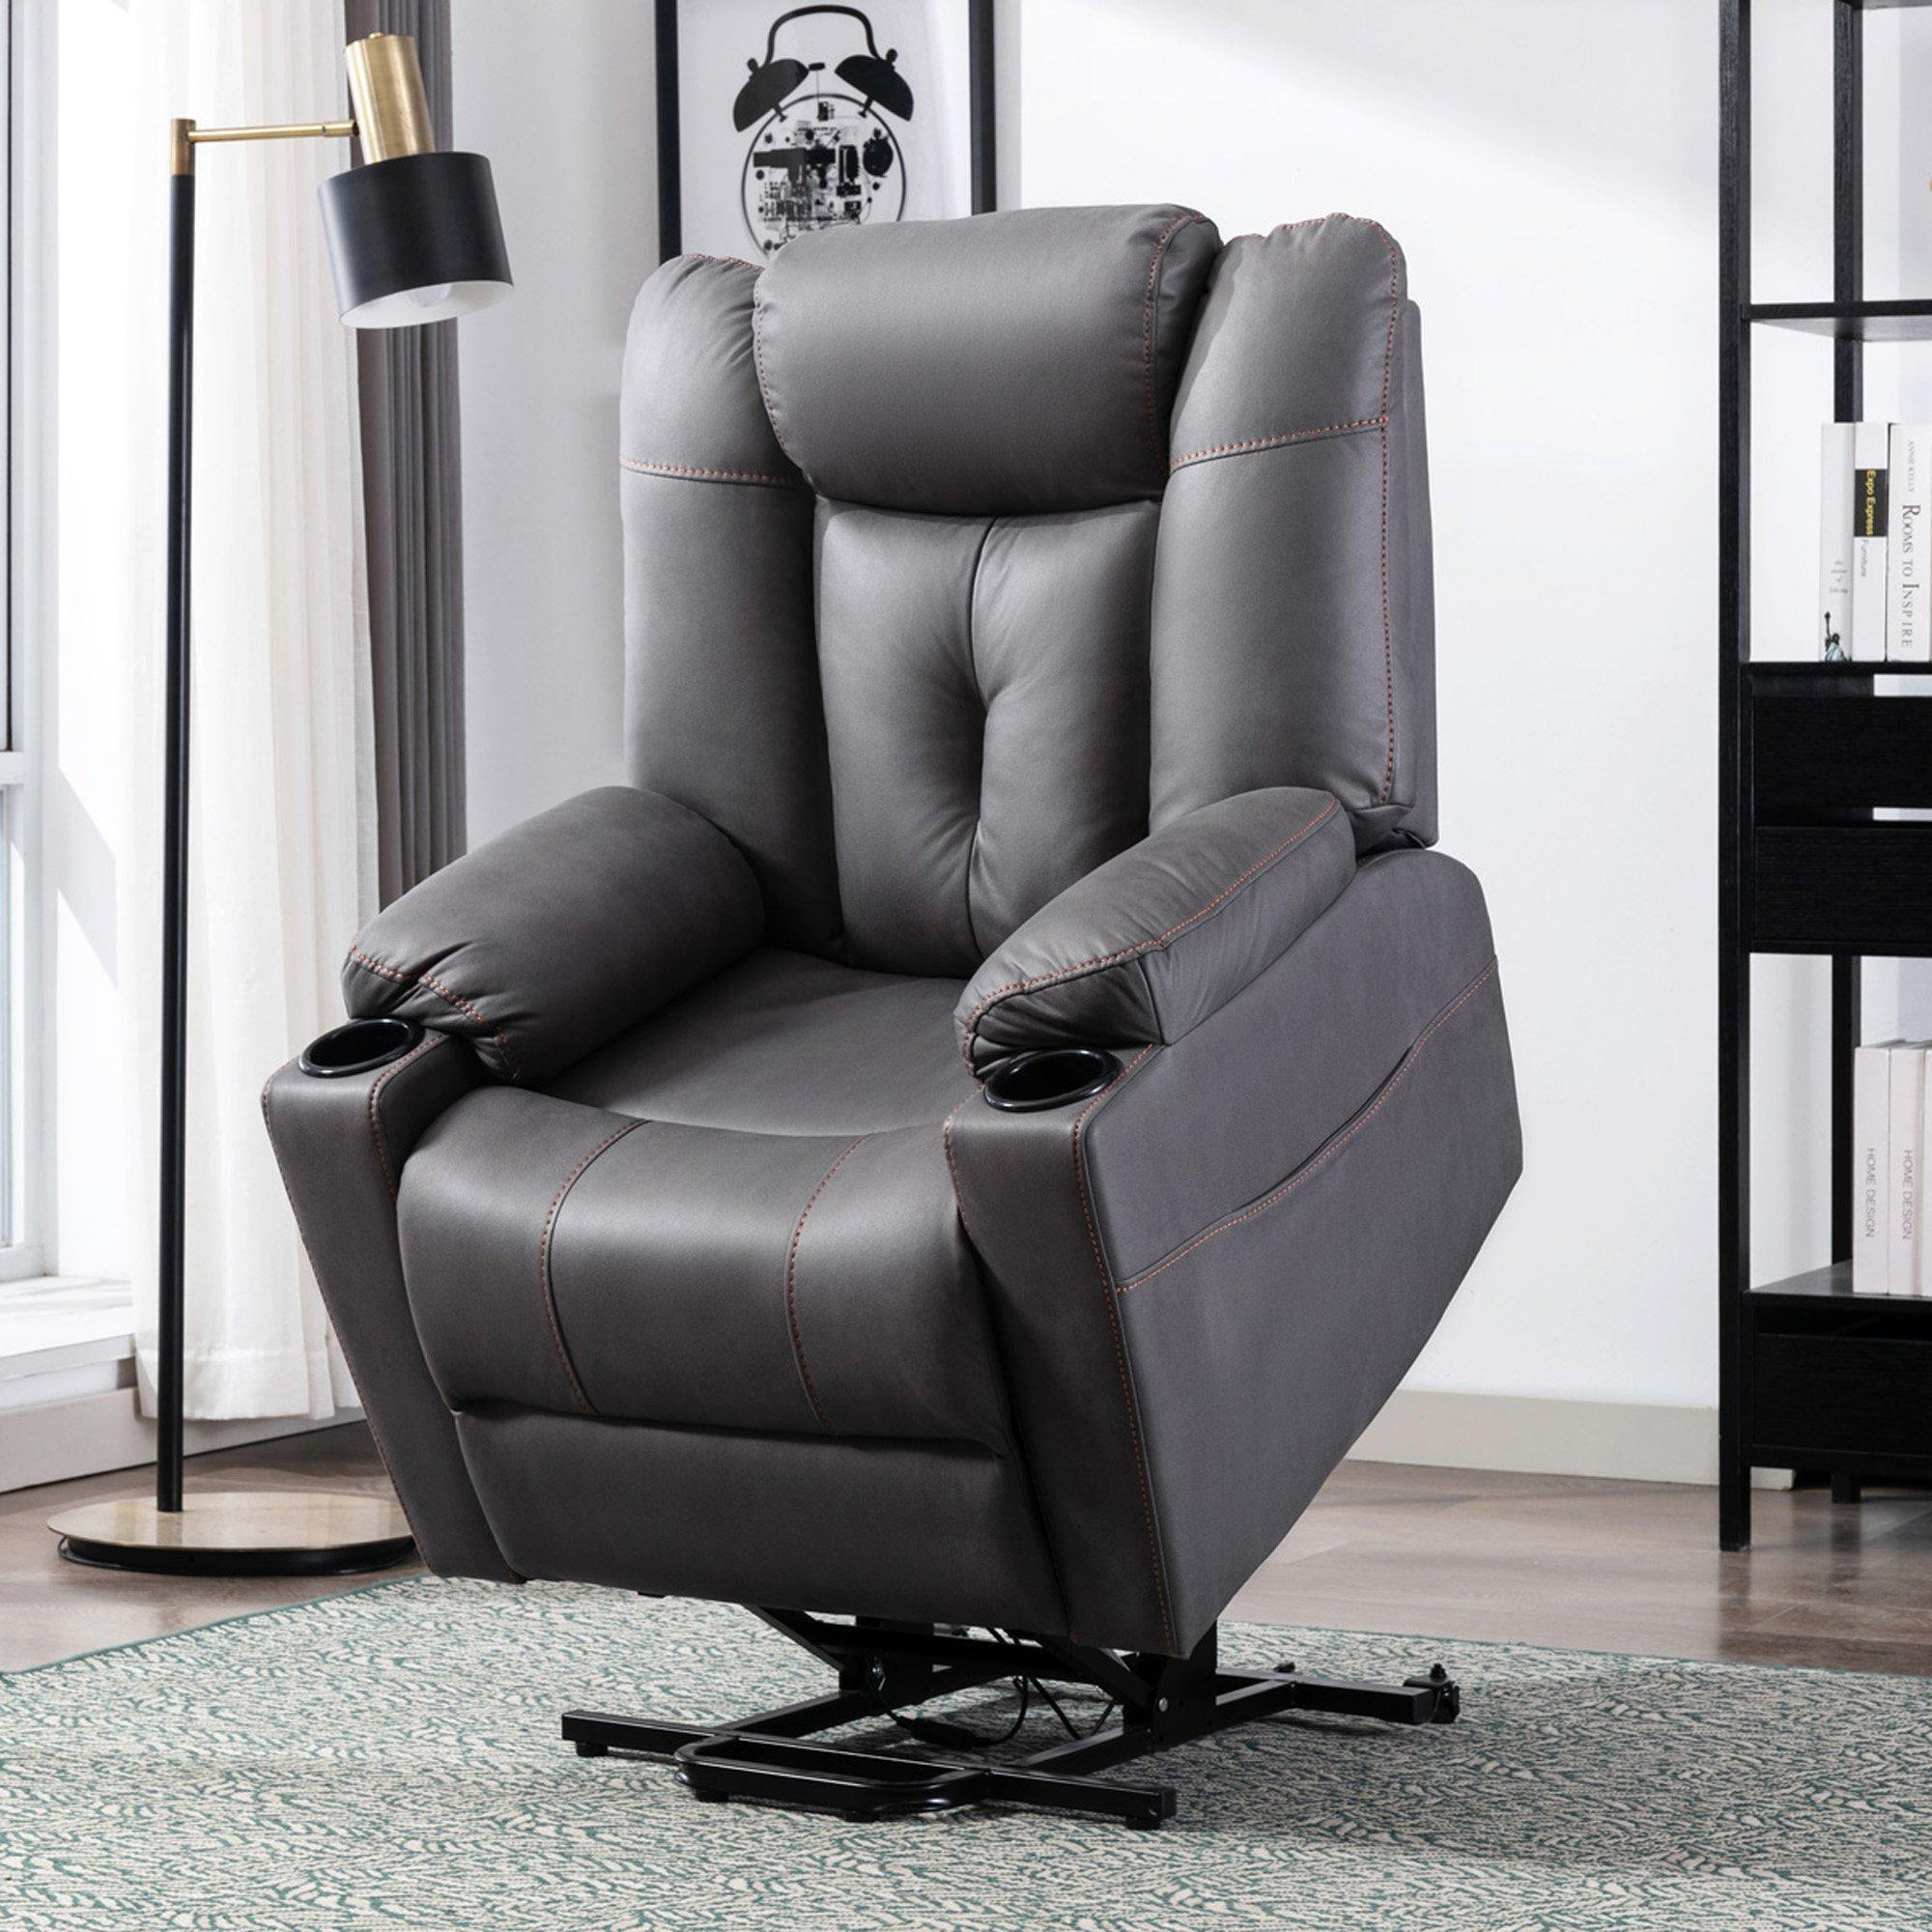 Afton Technology Fabric Single Motor Rise Recliner Lift Mobility Chair - image 1